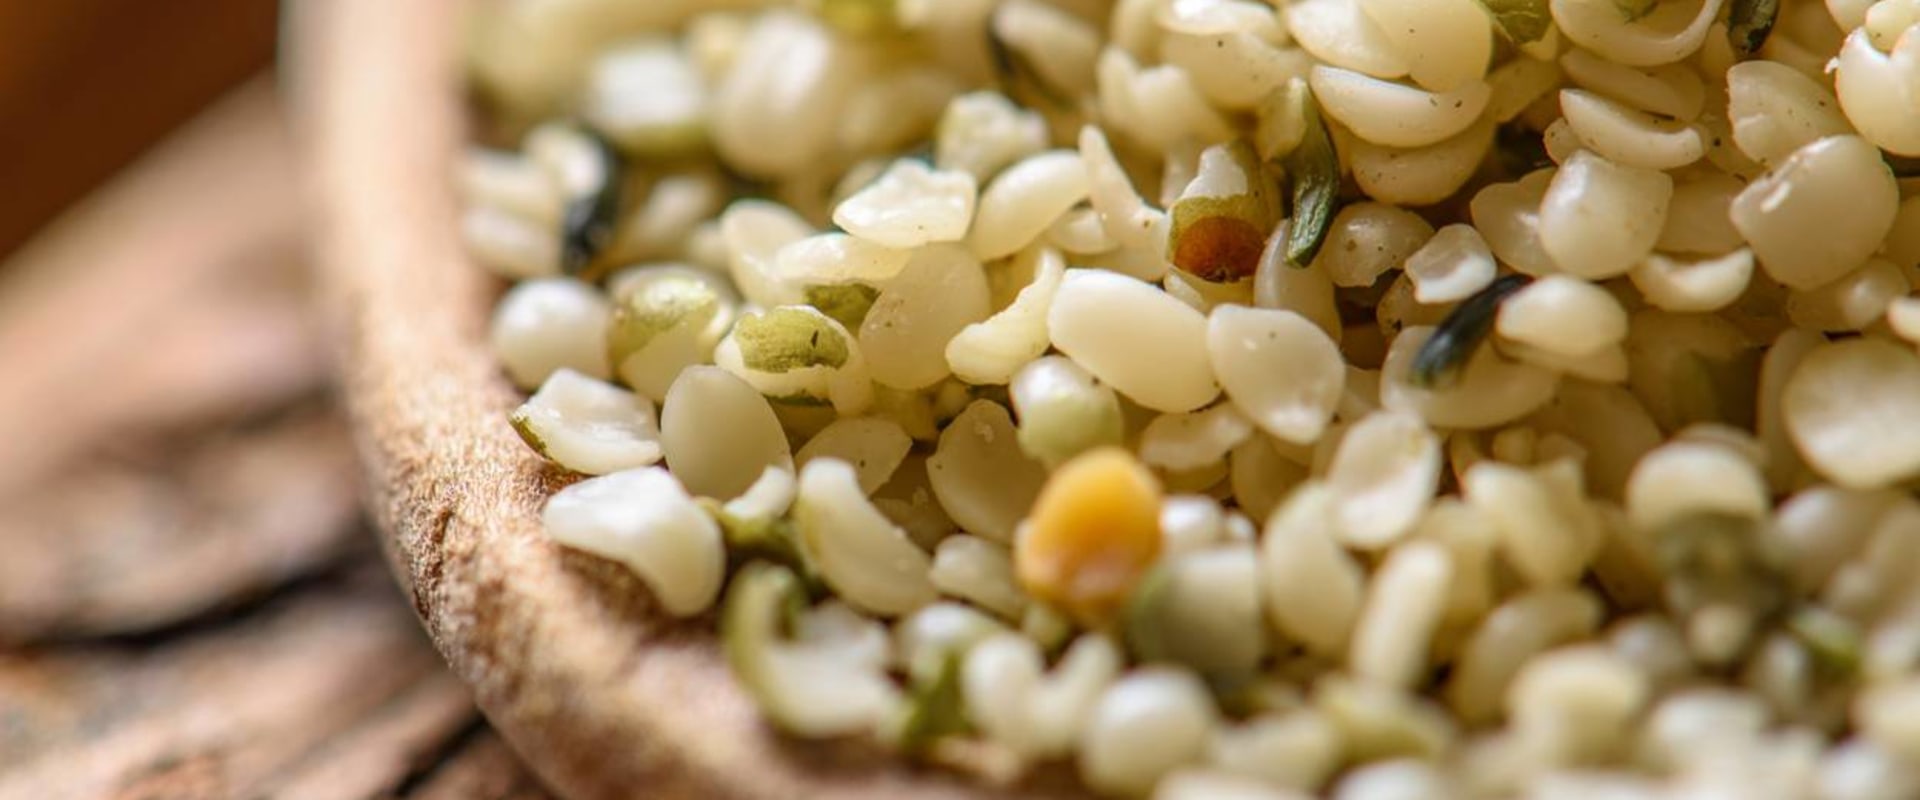 Can Hemp Seed Show Up on a Drug Test?